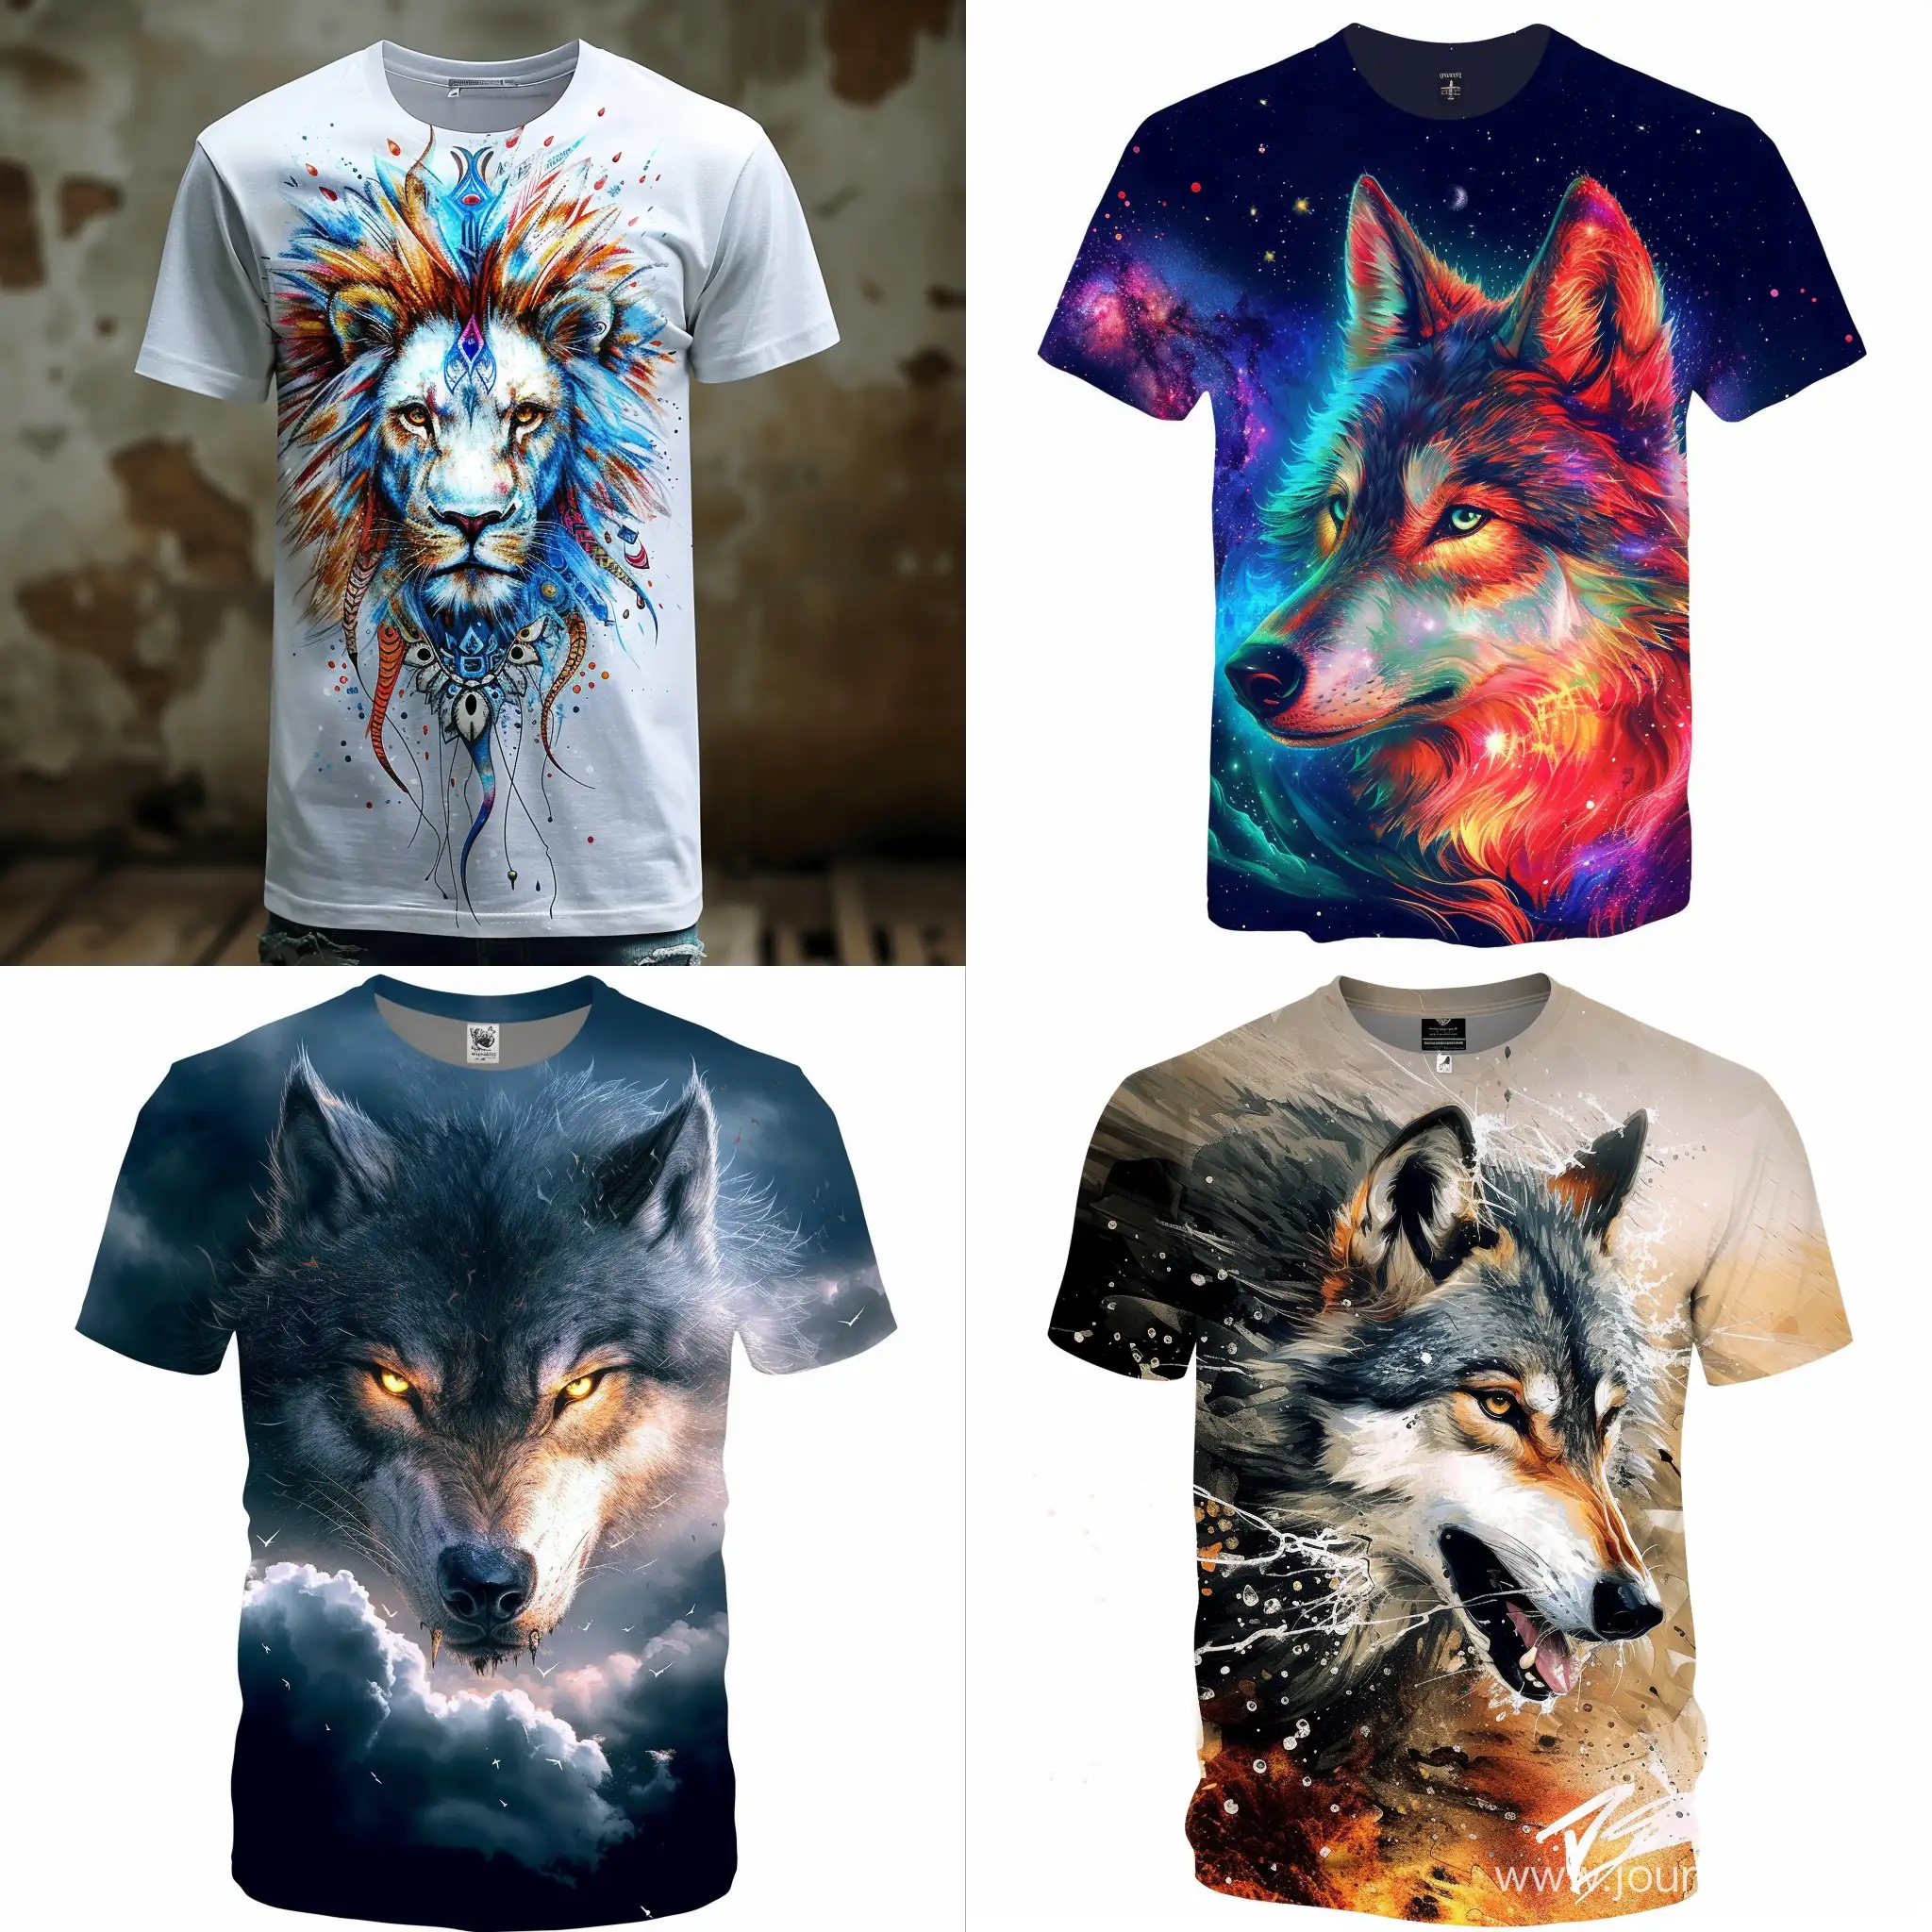 Trendy-TShirts-Collection-with-89805-Unique-Designs